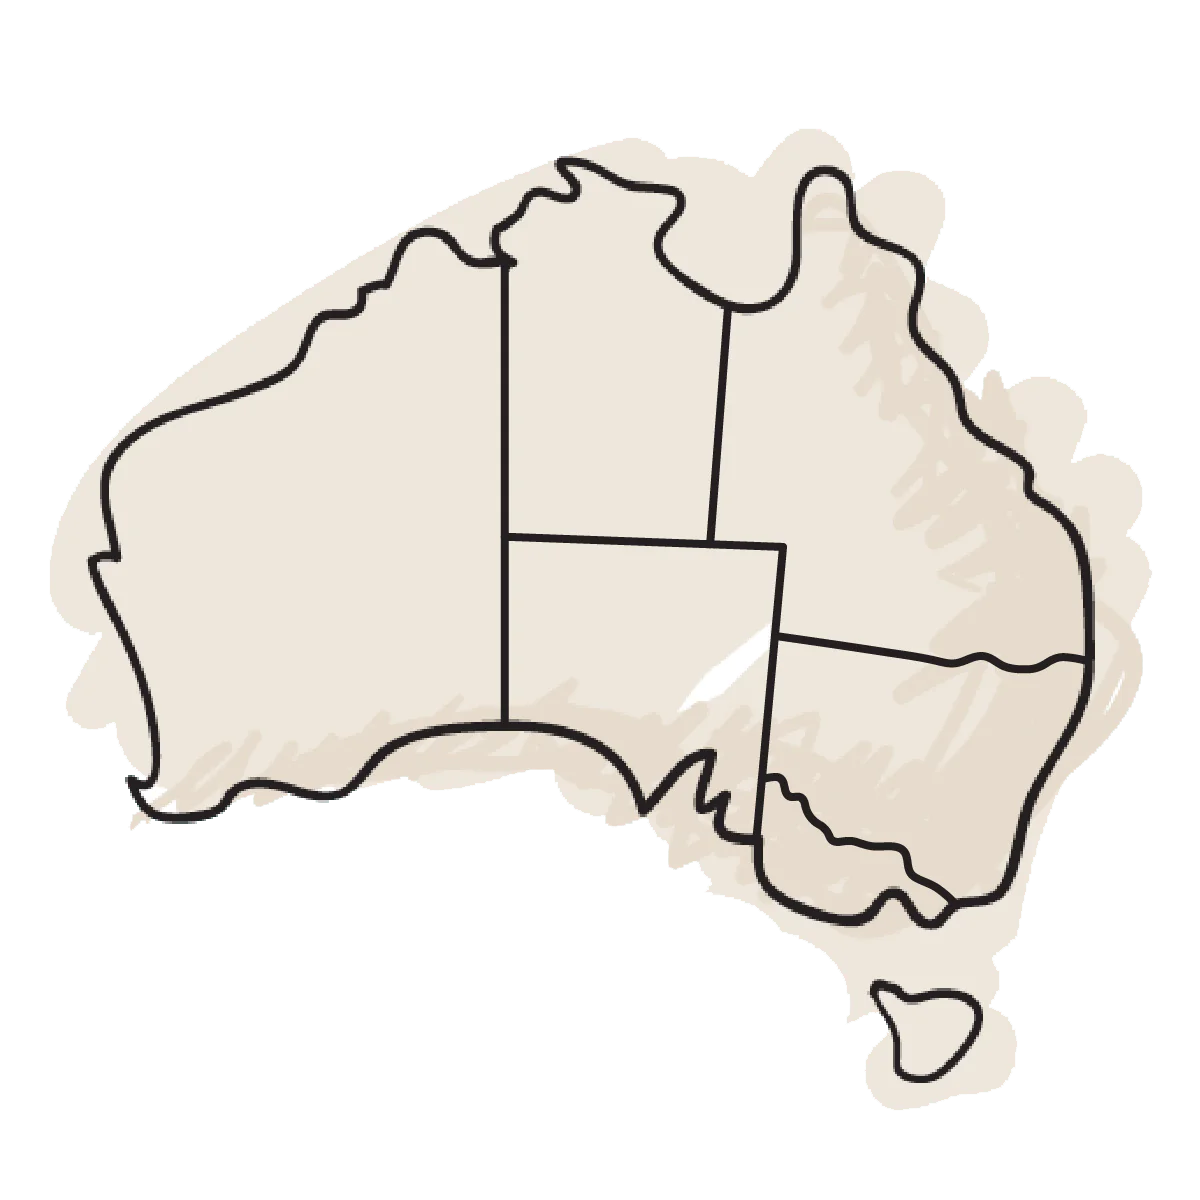 Australia map showing where the Coffee Club is established